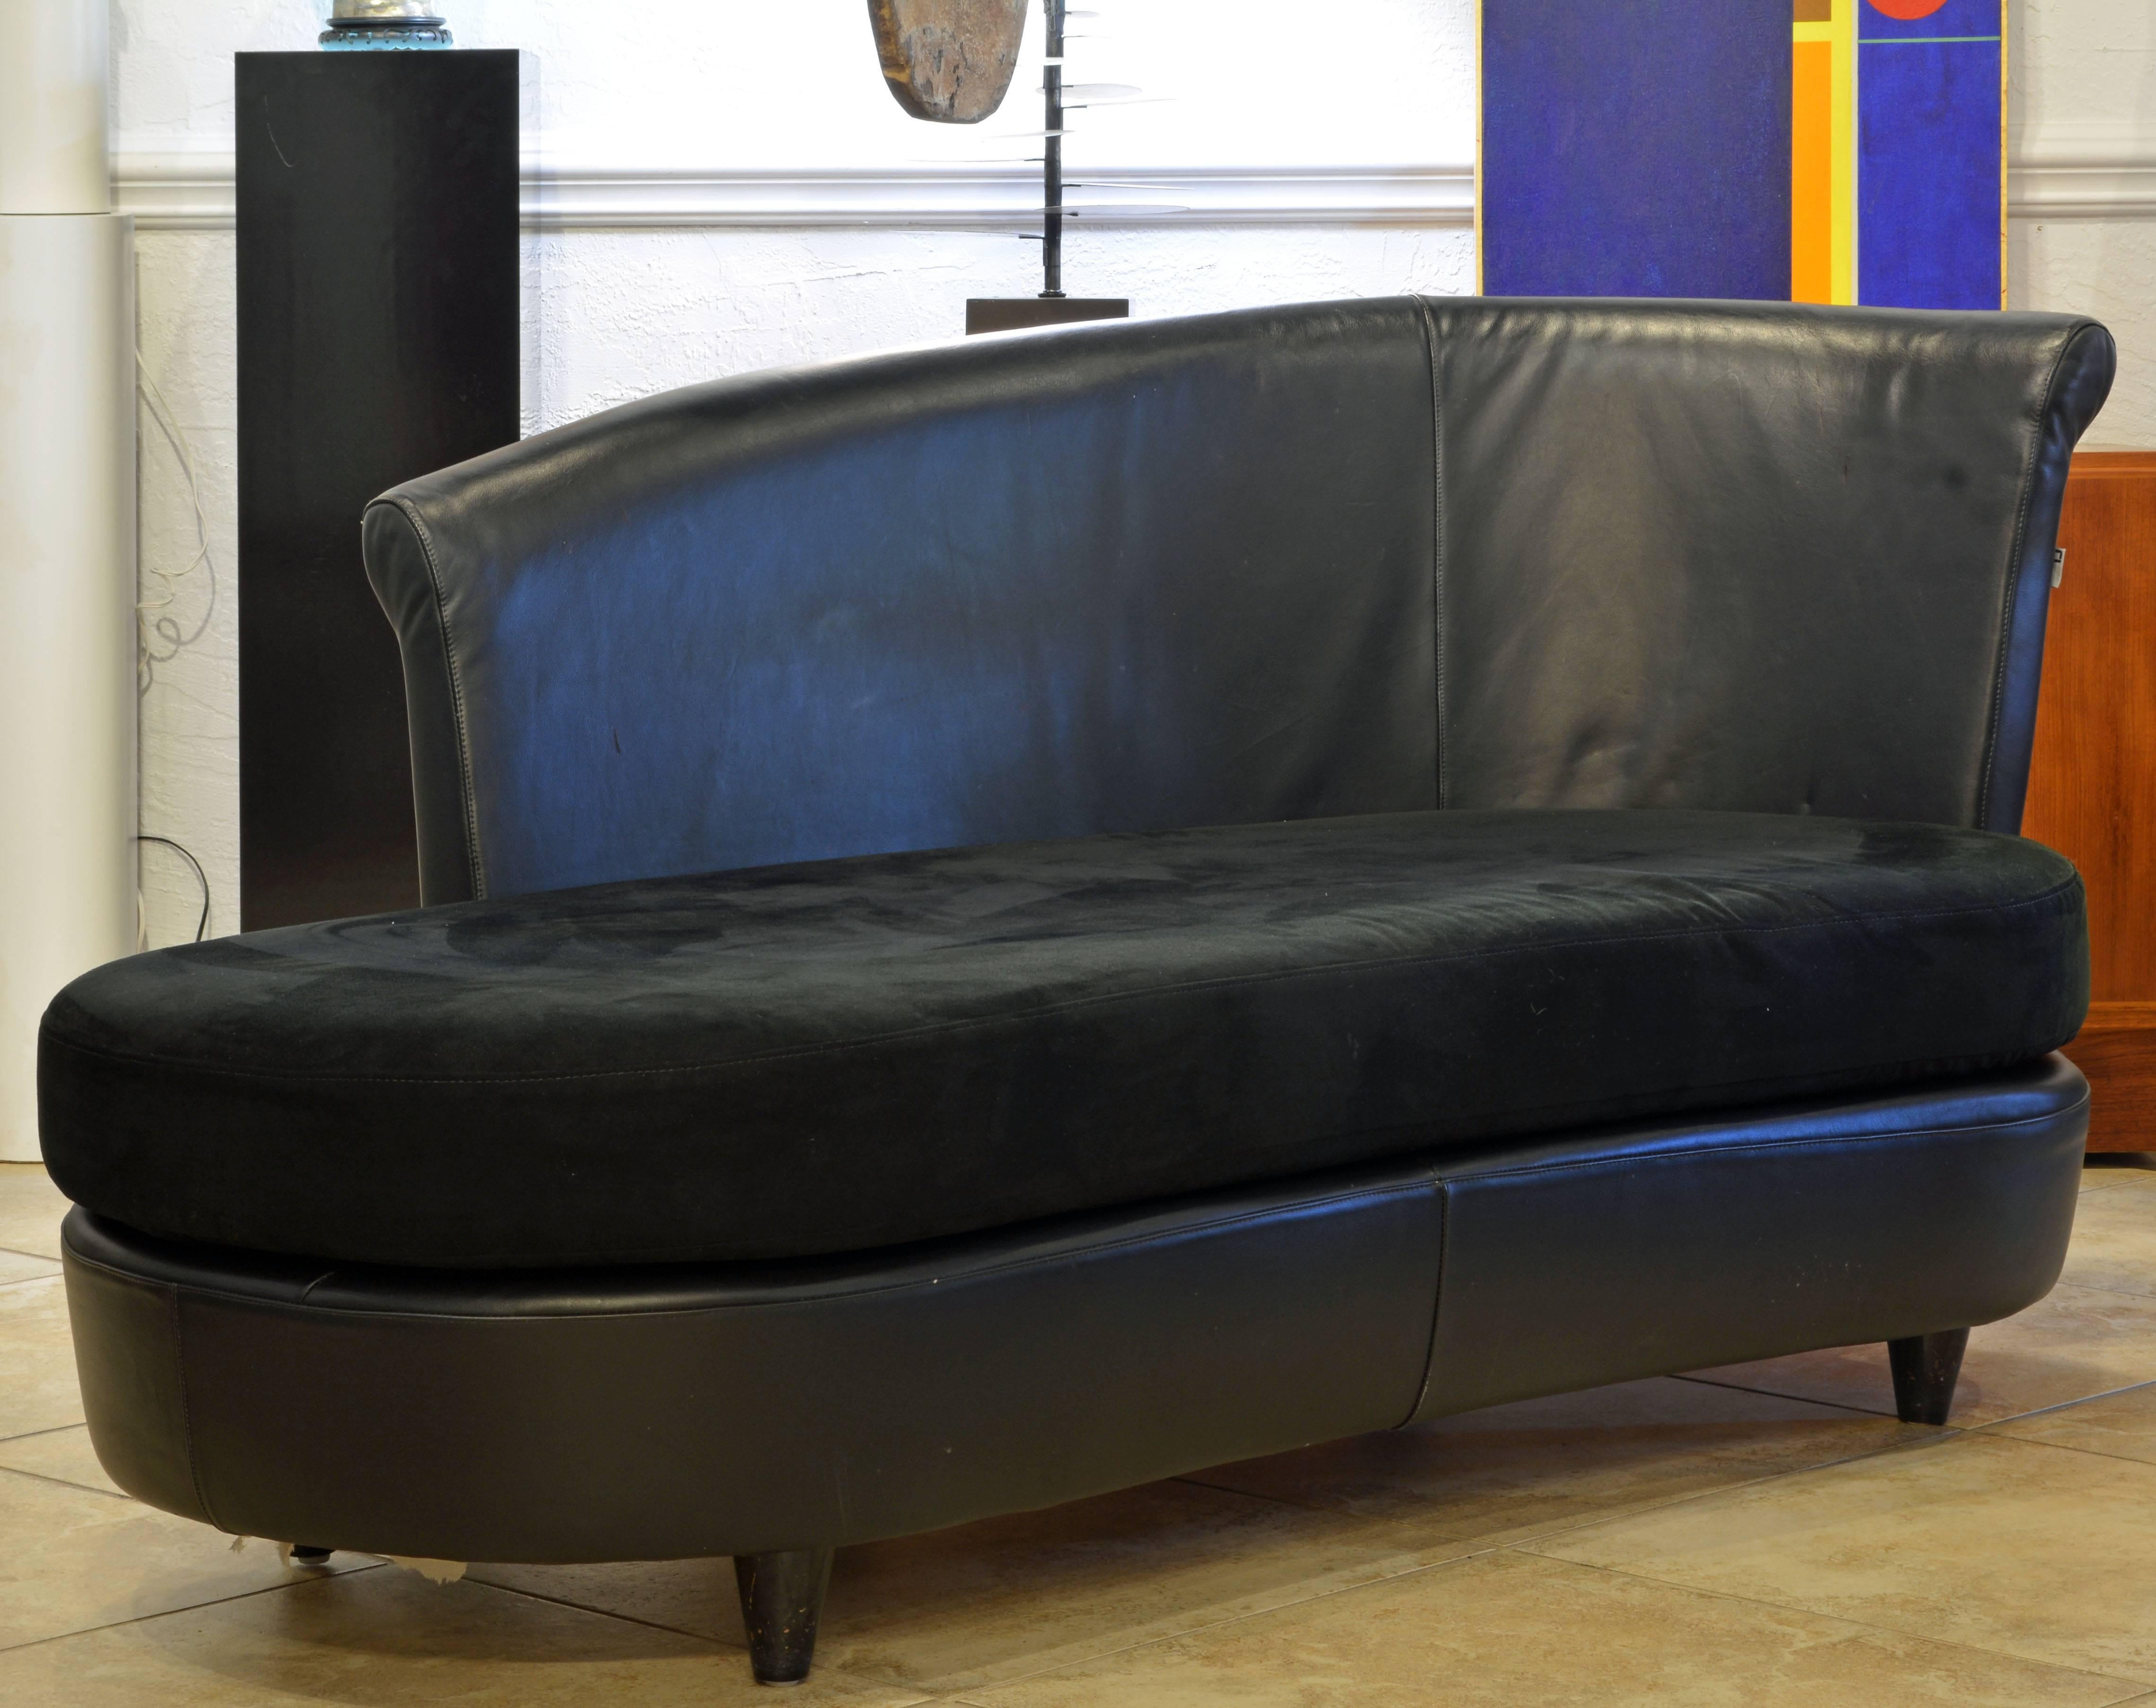 20th Century Vintage Art Deco Inspired Italian Leather Sofa or Chaise by Ferlea Italy